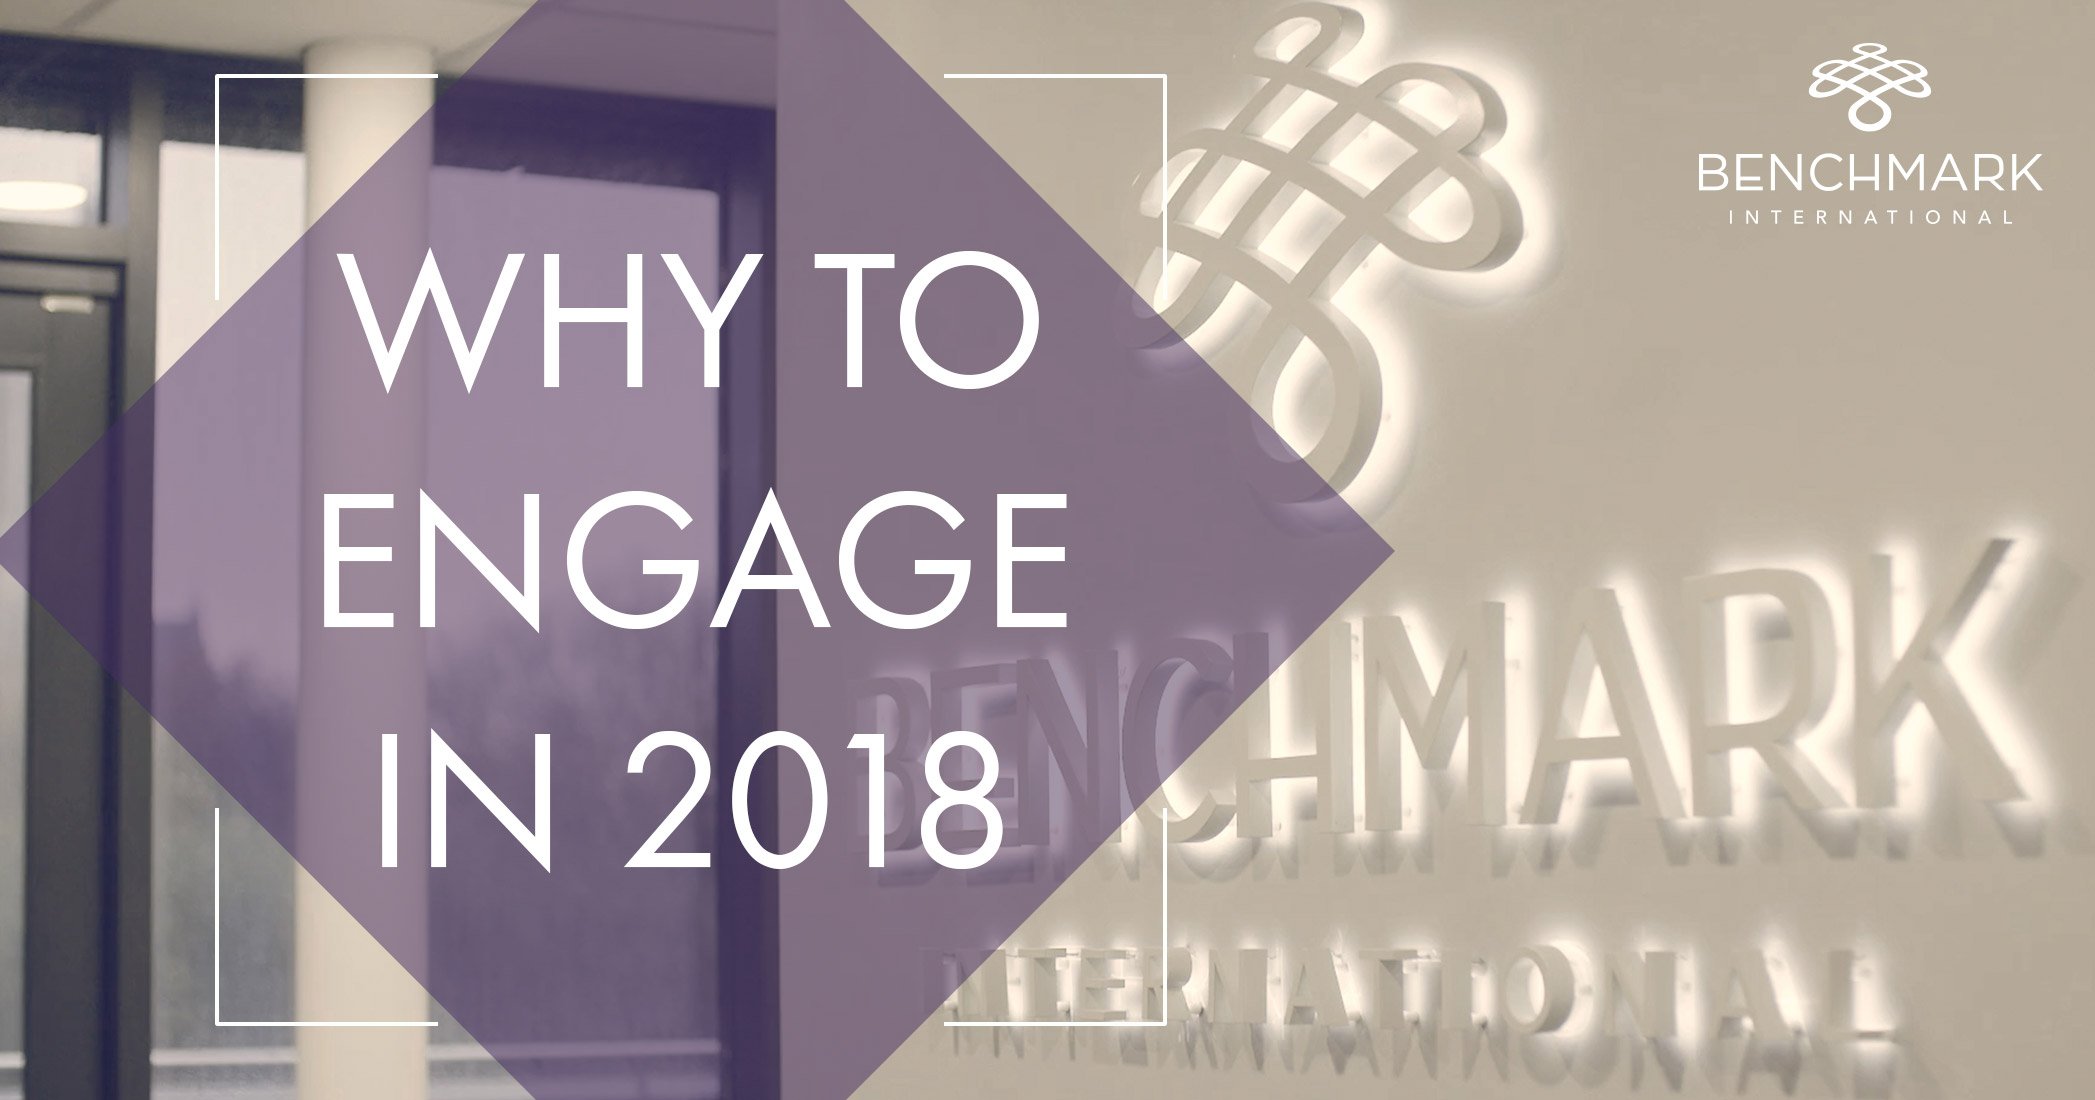 Why Engaging in 2018 is Advantageous for your Business